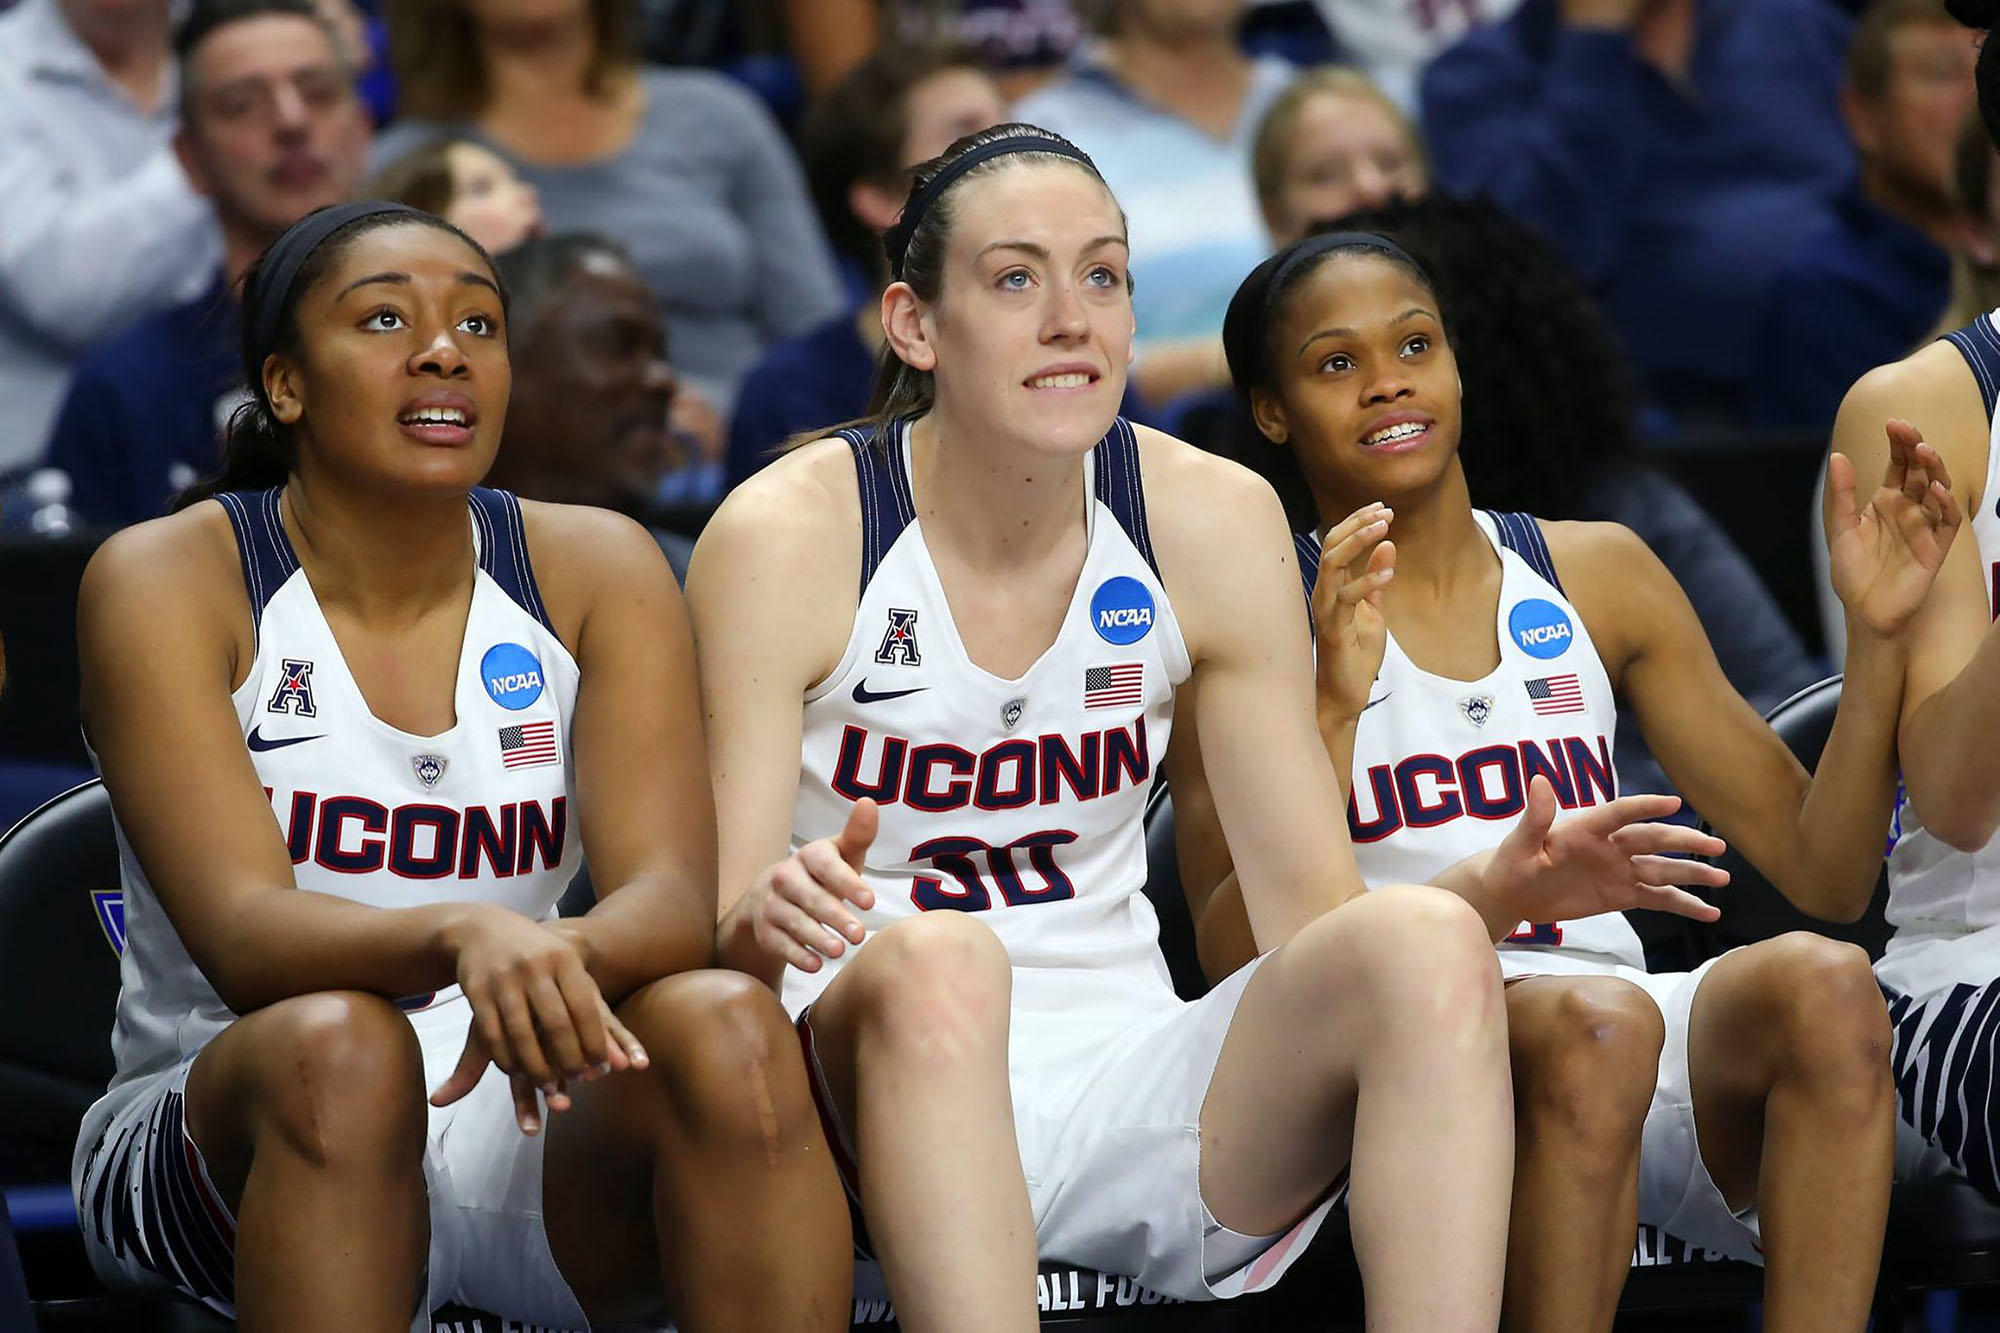 UConn Women's Basketball Will Contend Next Year, But Won't Dominate